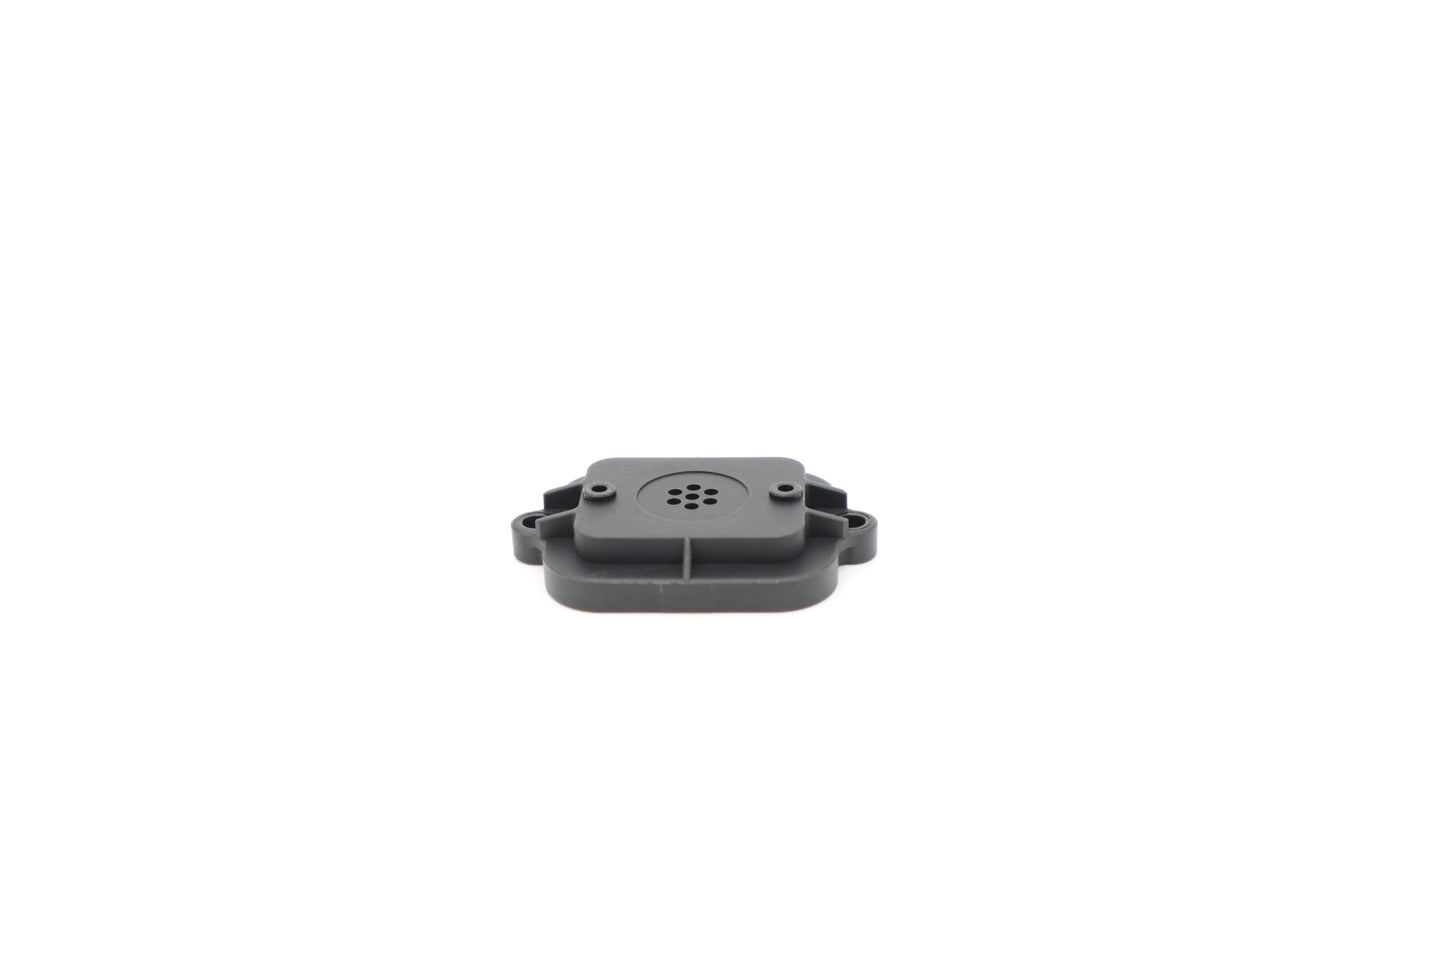 DJI Agras T30 Barometer Outer Shell